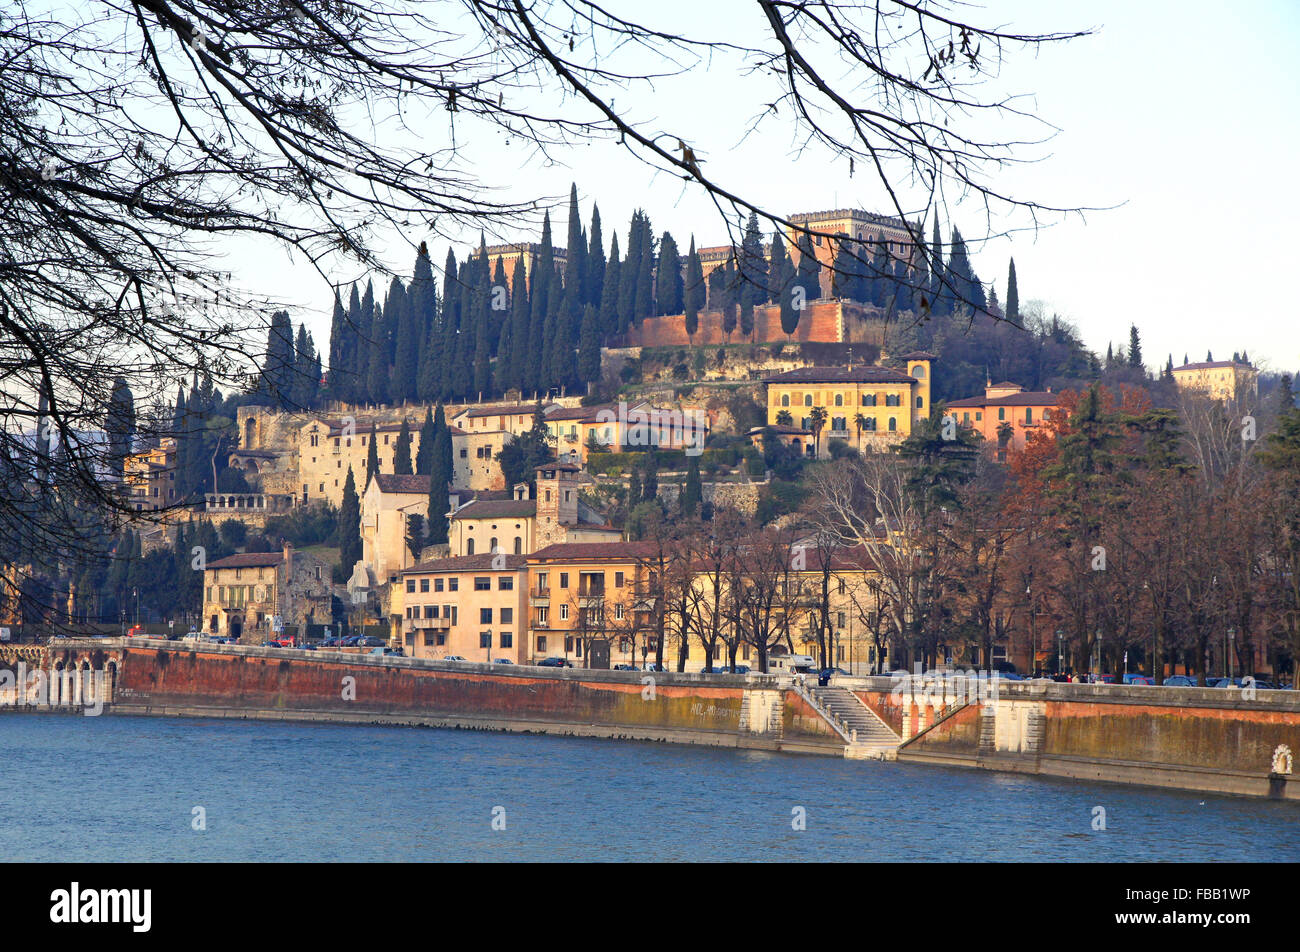 View to The Castel San Pietro and Adige river in Verona, Italy Stock Photo